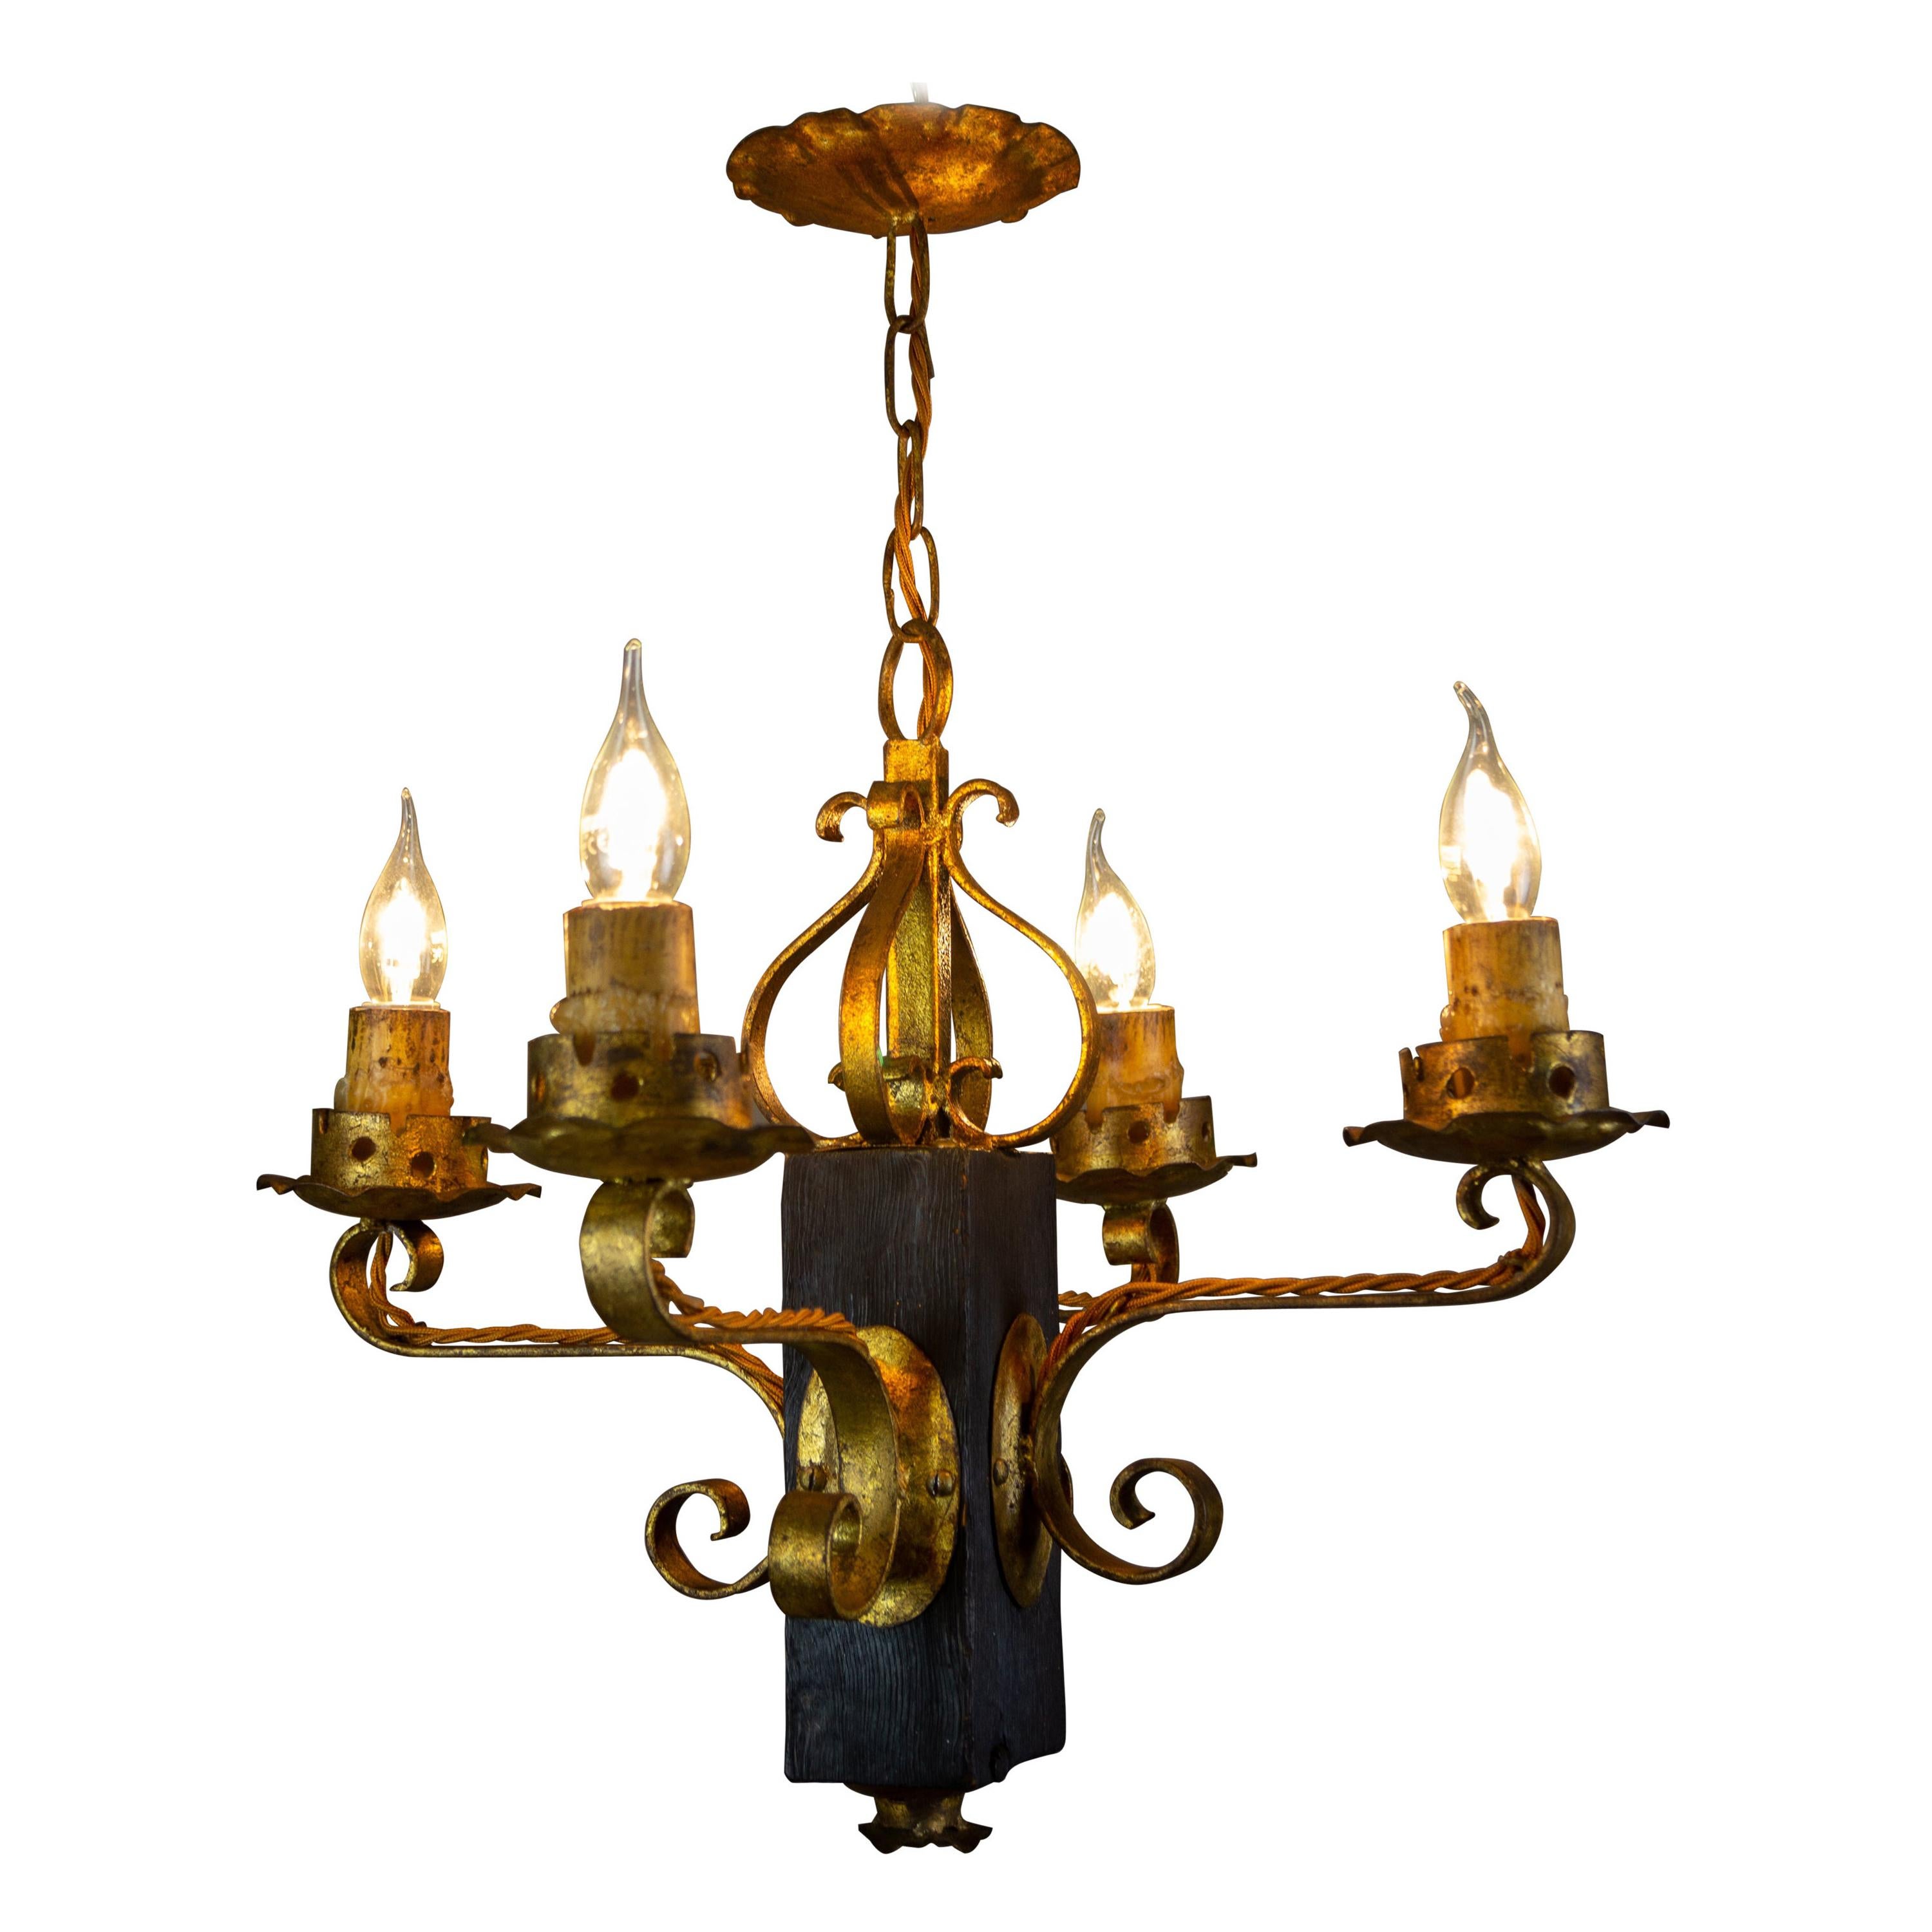 Gothic Style Gilt Wrought Iron and Black Wood Four-Light Chandelier